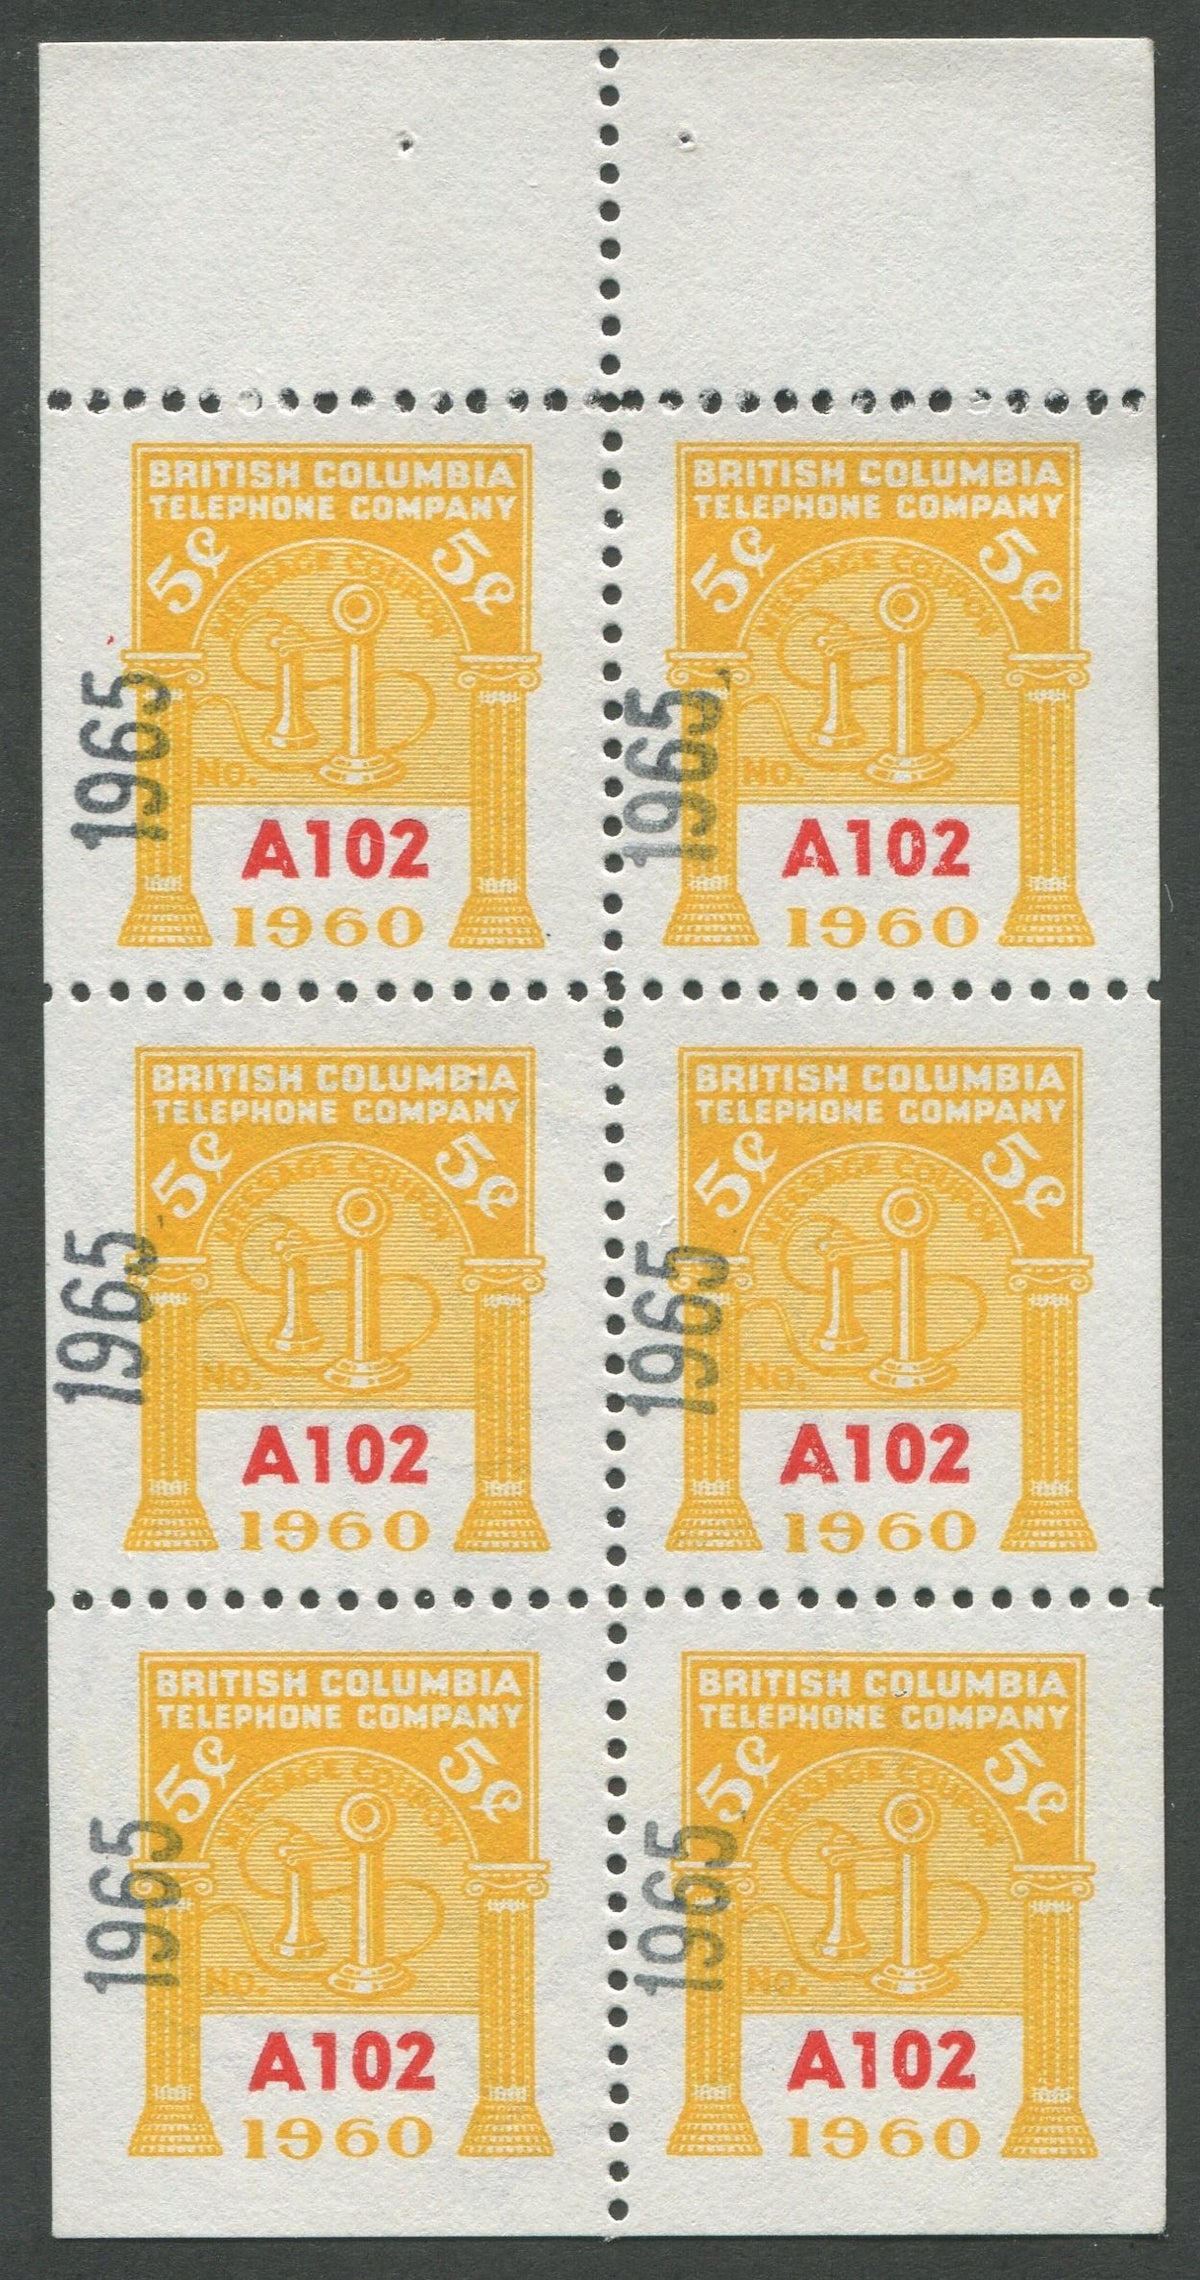 0303BC1708 - BCT205 - Mint Booklet Pane, Watermarked